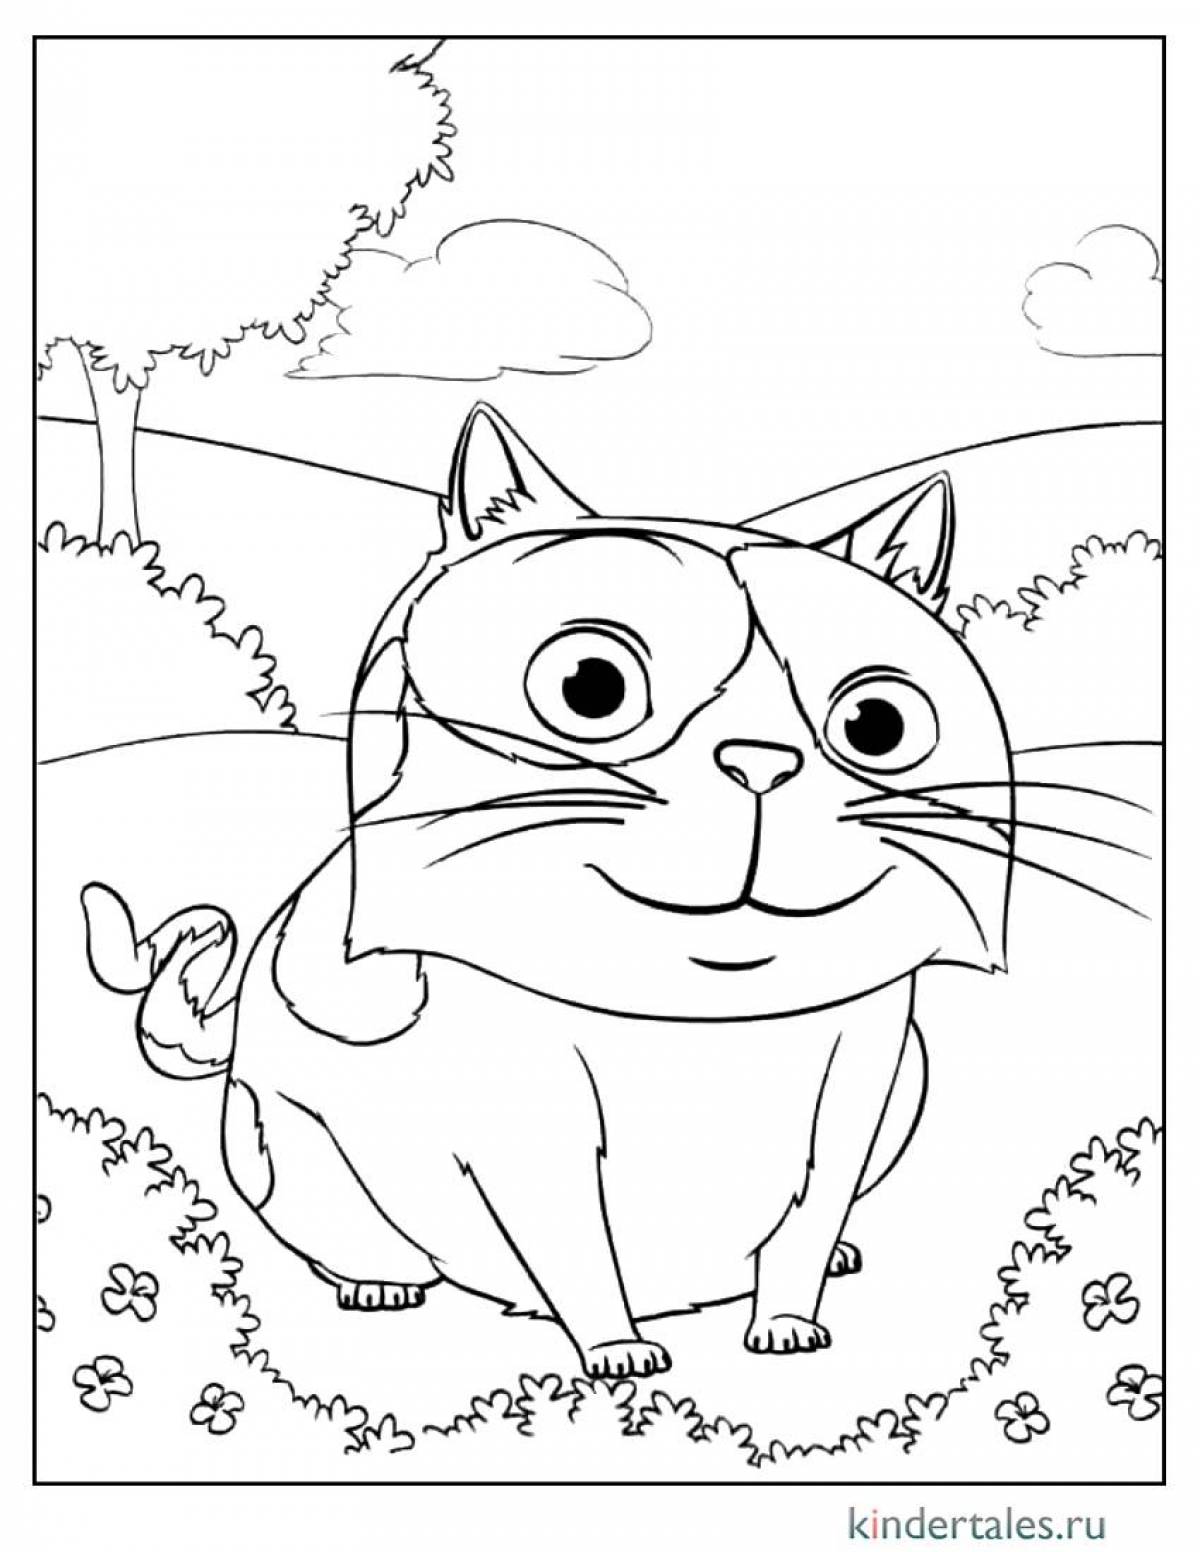 Chipper cartoon cat coloring page